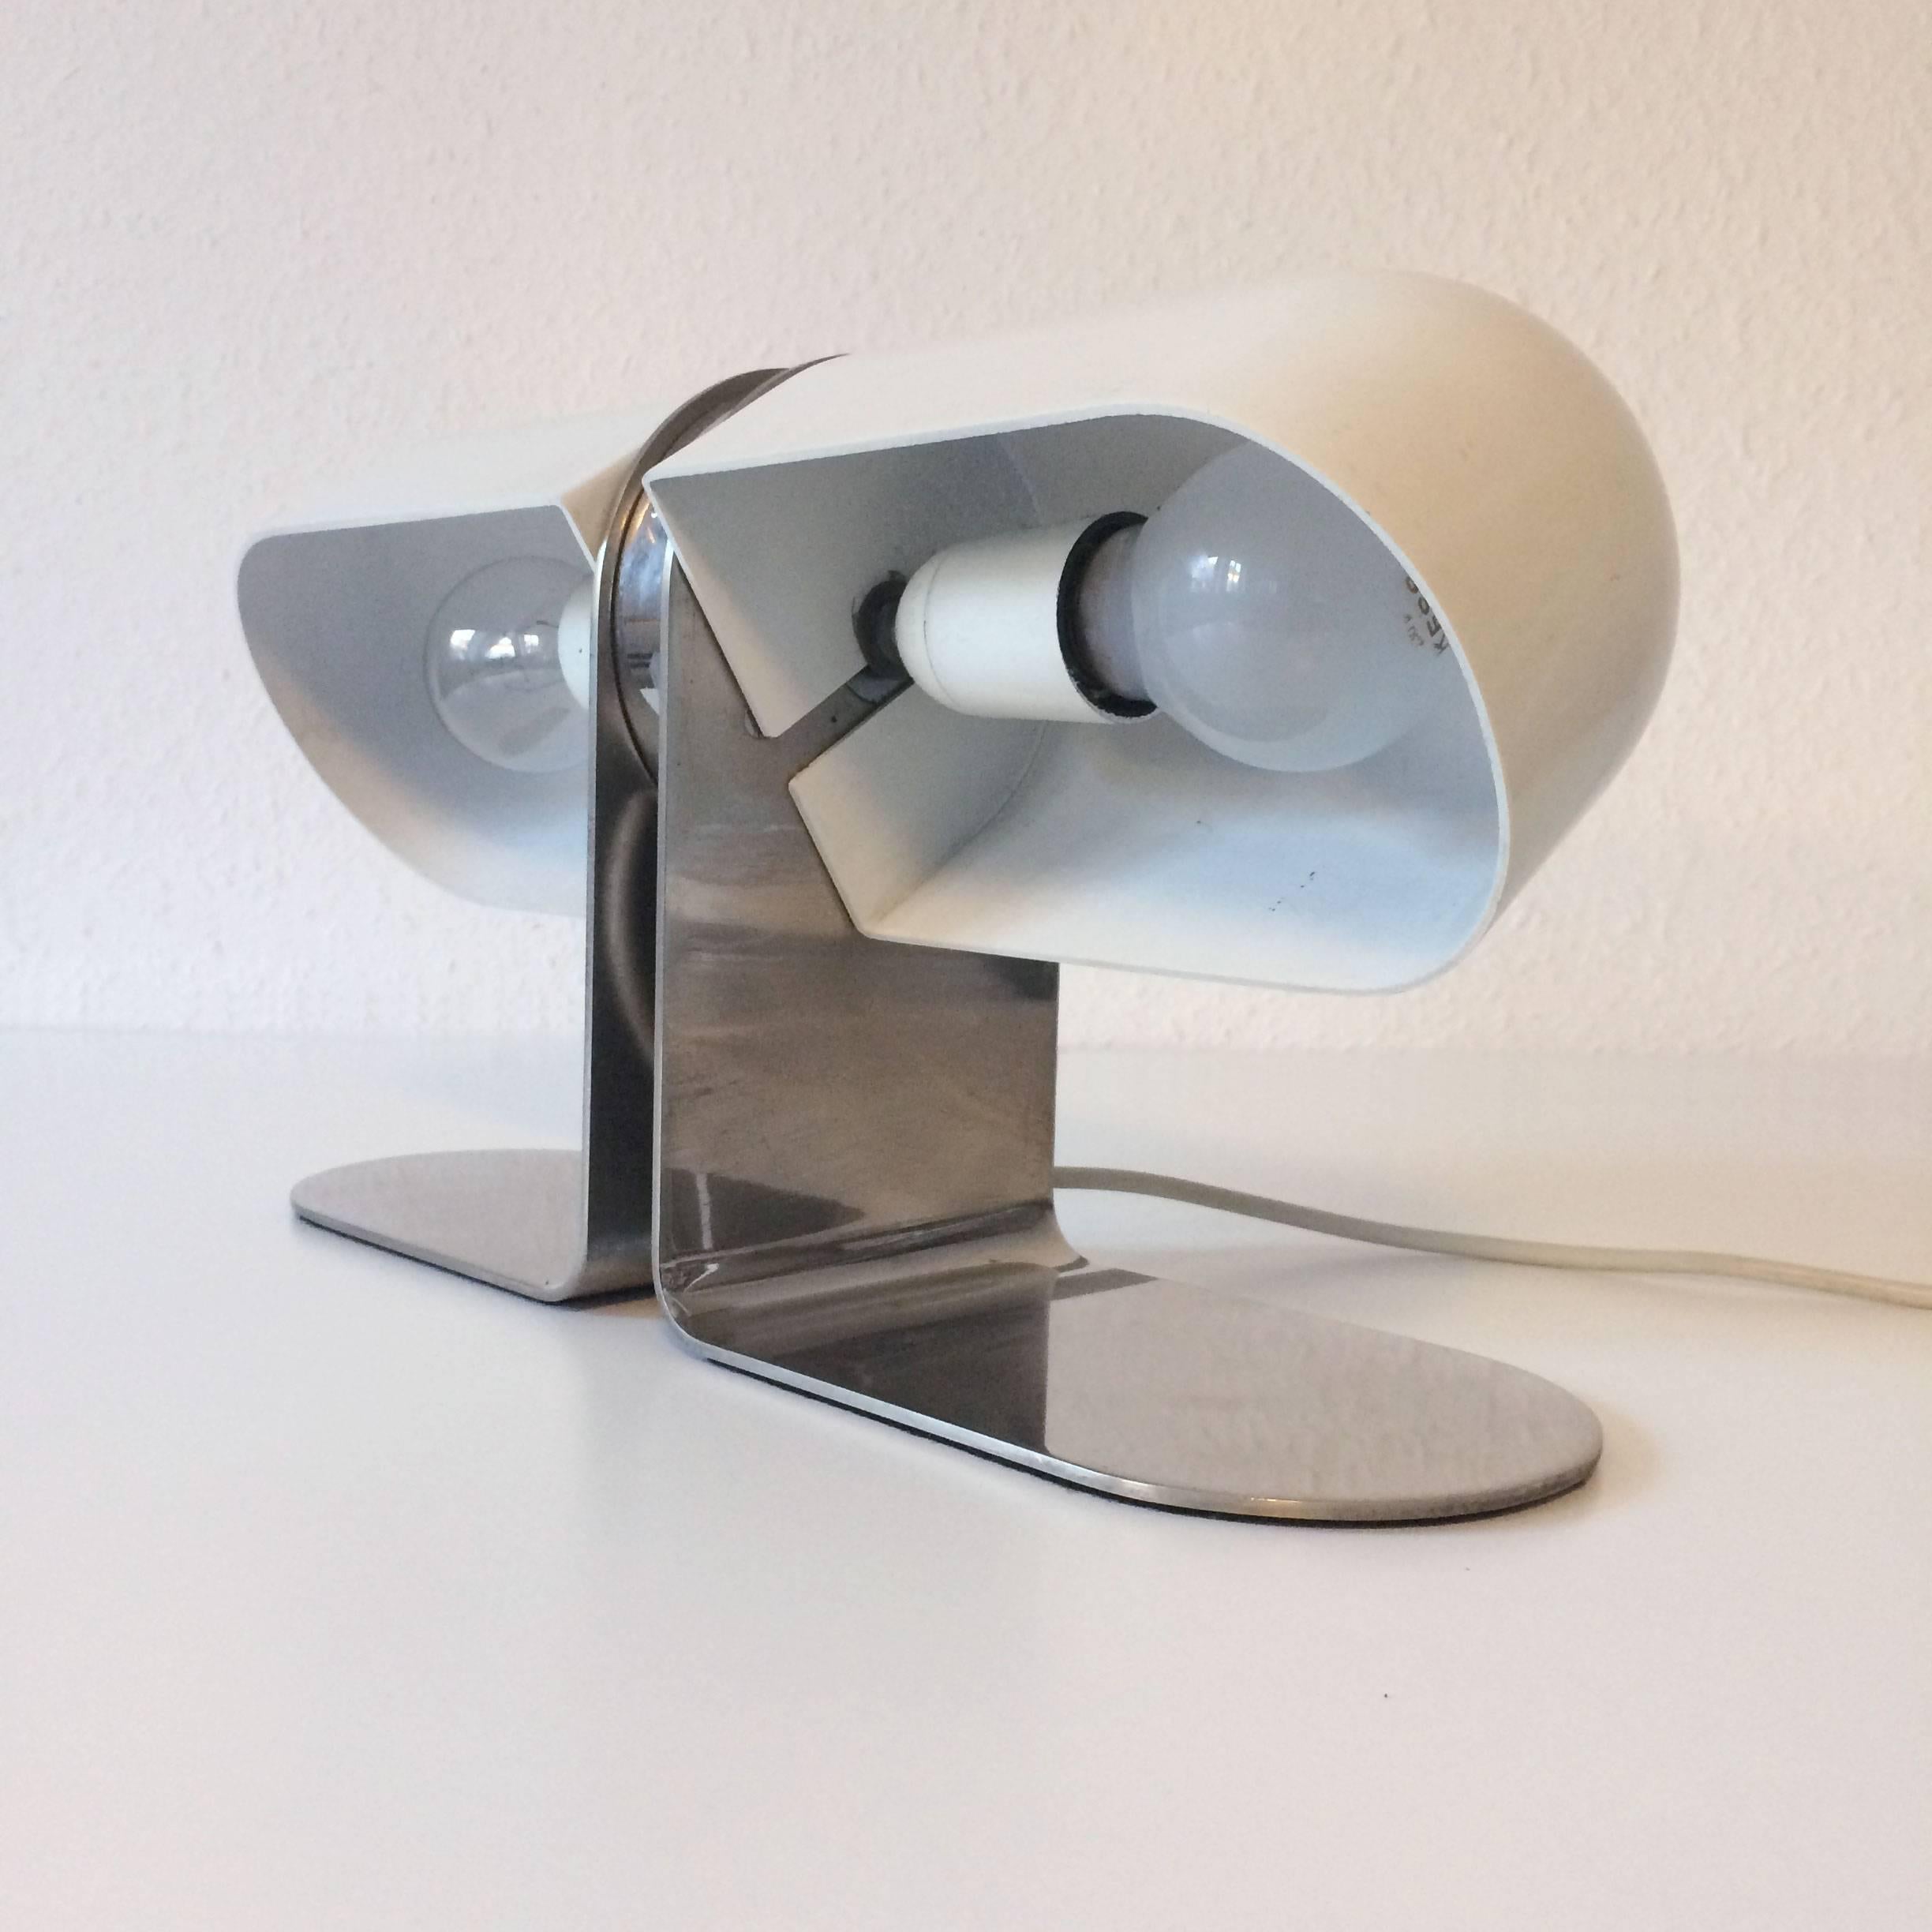 Rare Mid Century Modern Table Lamp or Desk Light by Andre Ricard for Metalarte For Sale 4